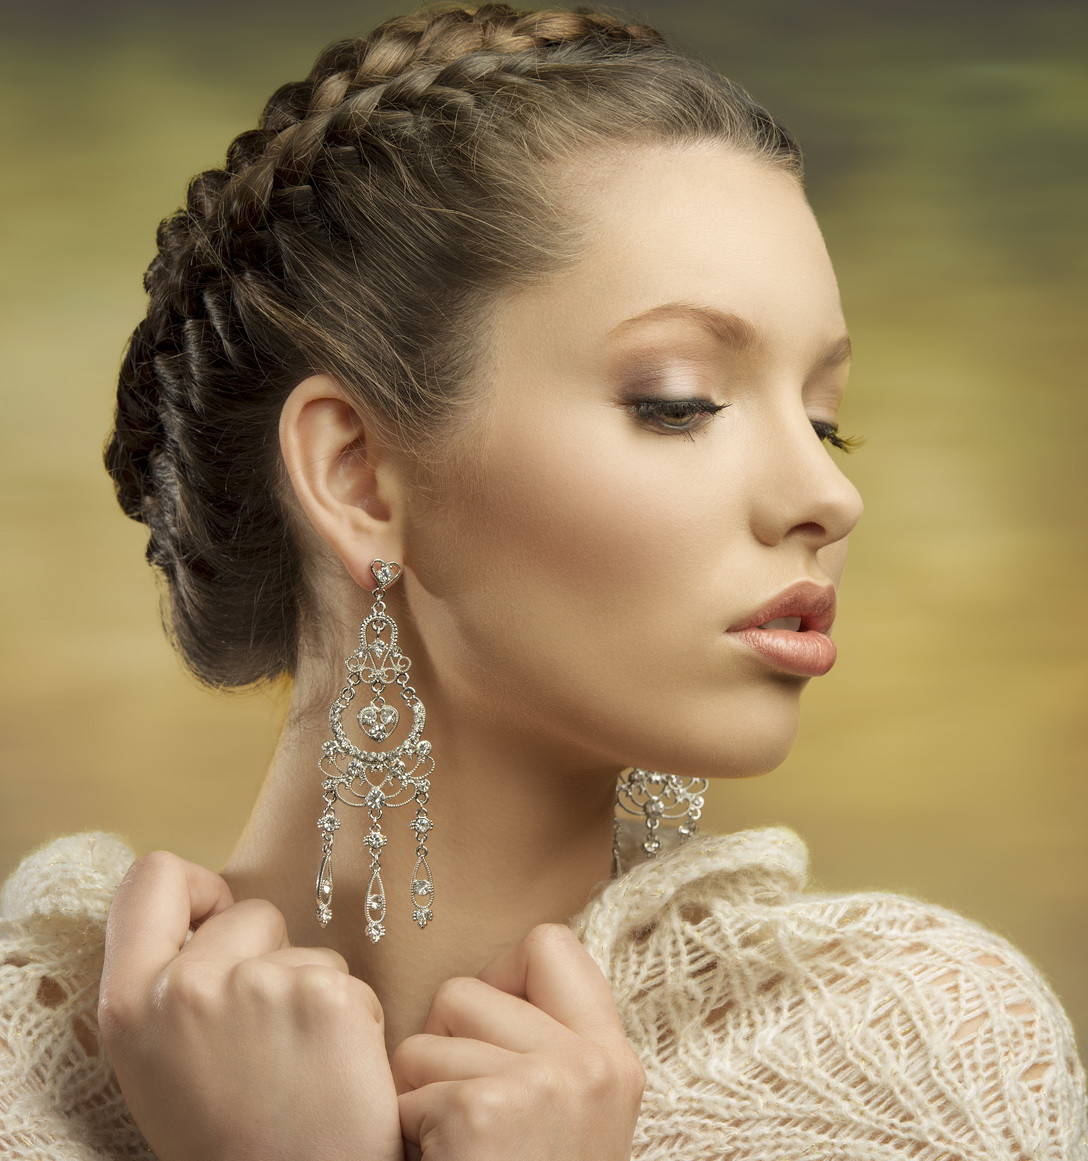 Elegant Updo Hairstyles
 25 elegant hairstyles for all holiday celebrations